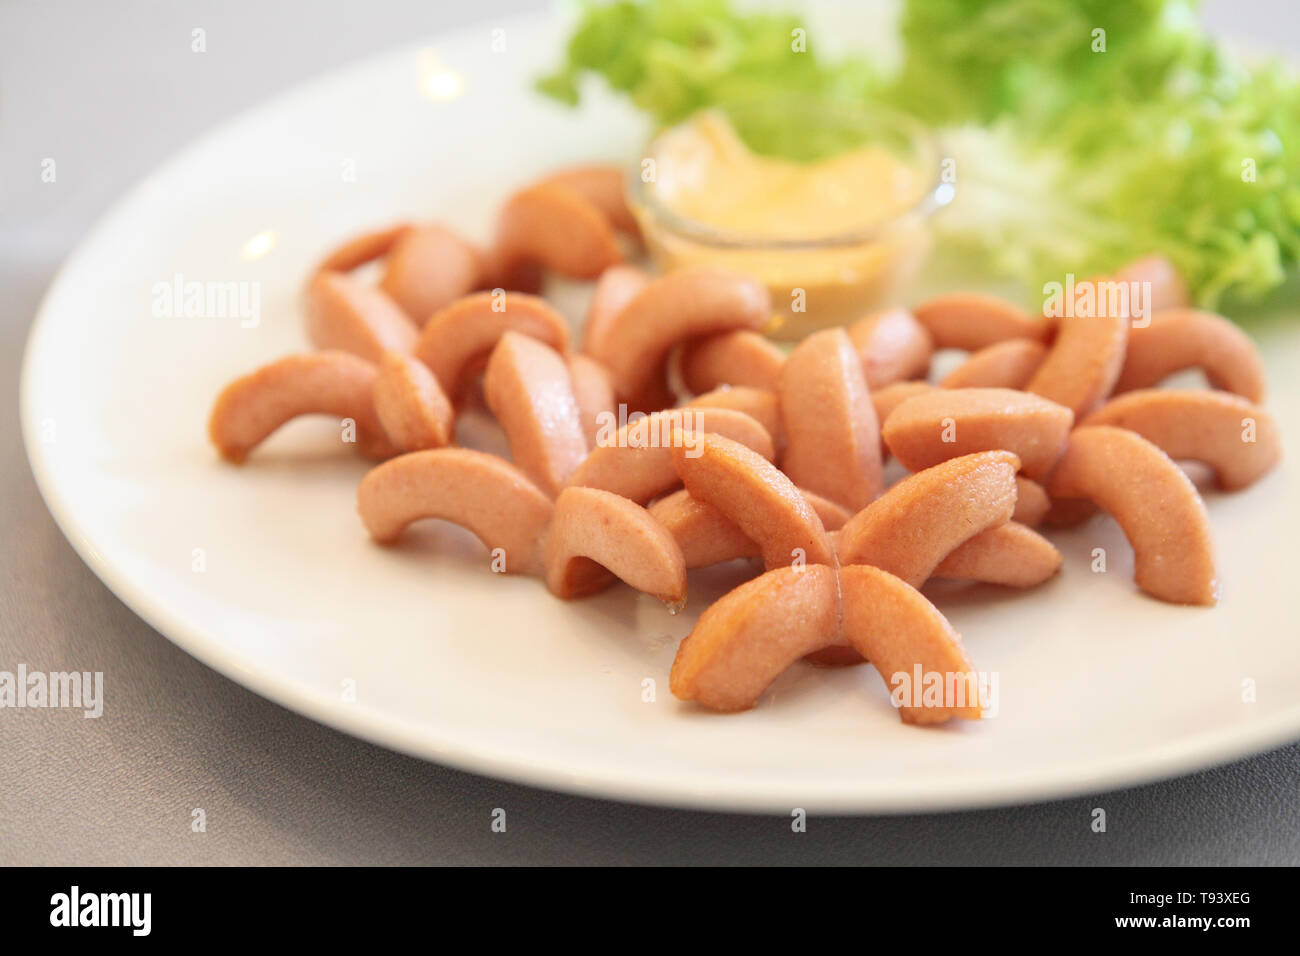 Fried cocktail sausages Stock Photo